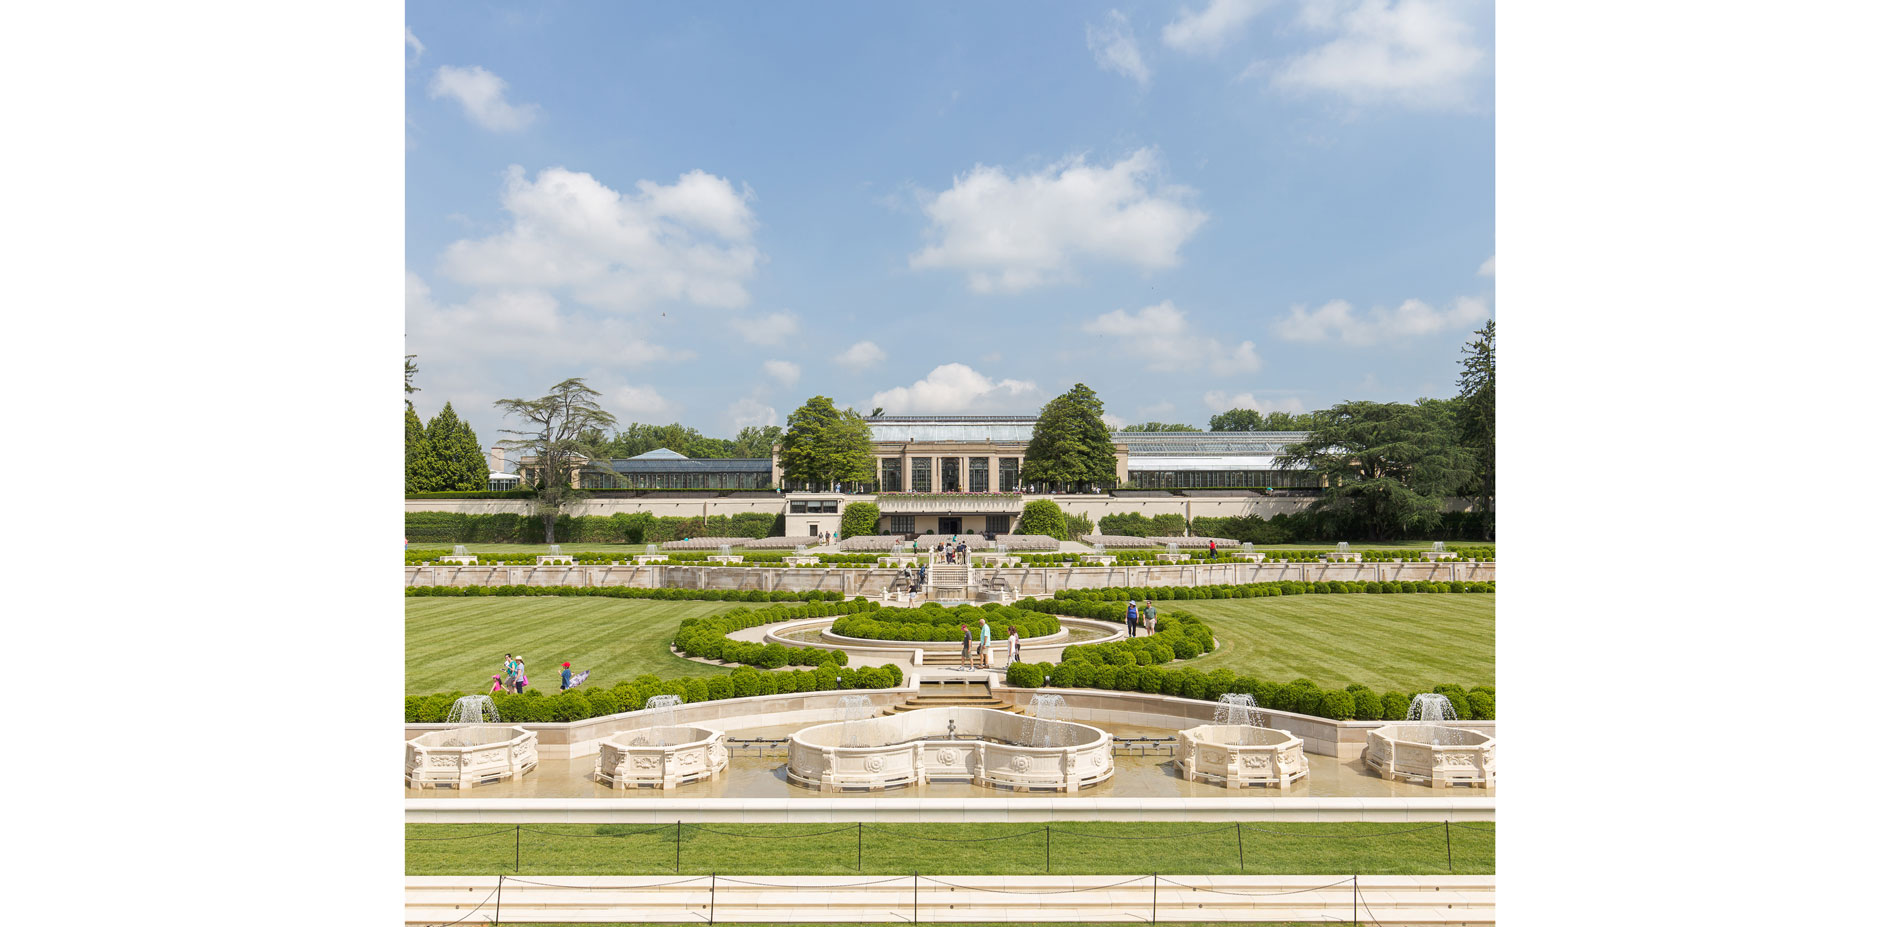 The Longwood Main Fountain Garden. Longwood Gardens aspires to be one of the best gardens in the world. The reimagined Main Fountain Garden is its mos…